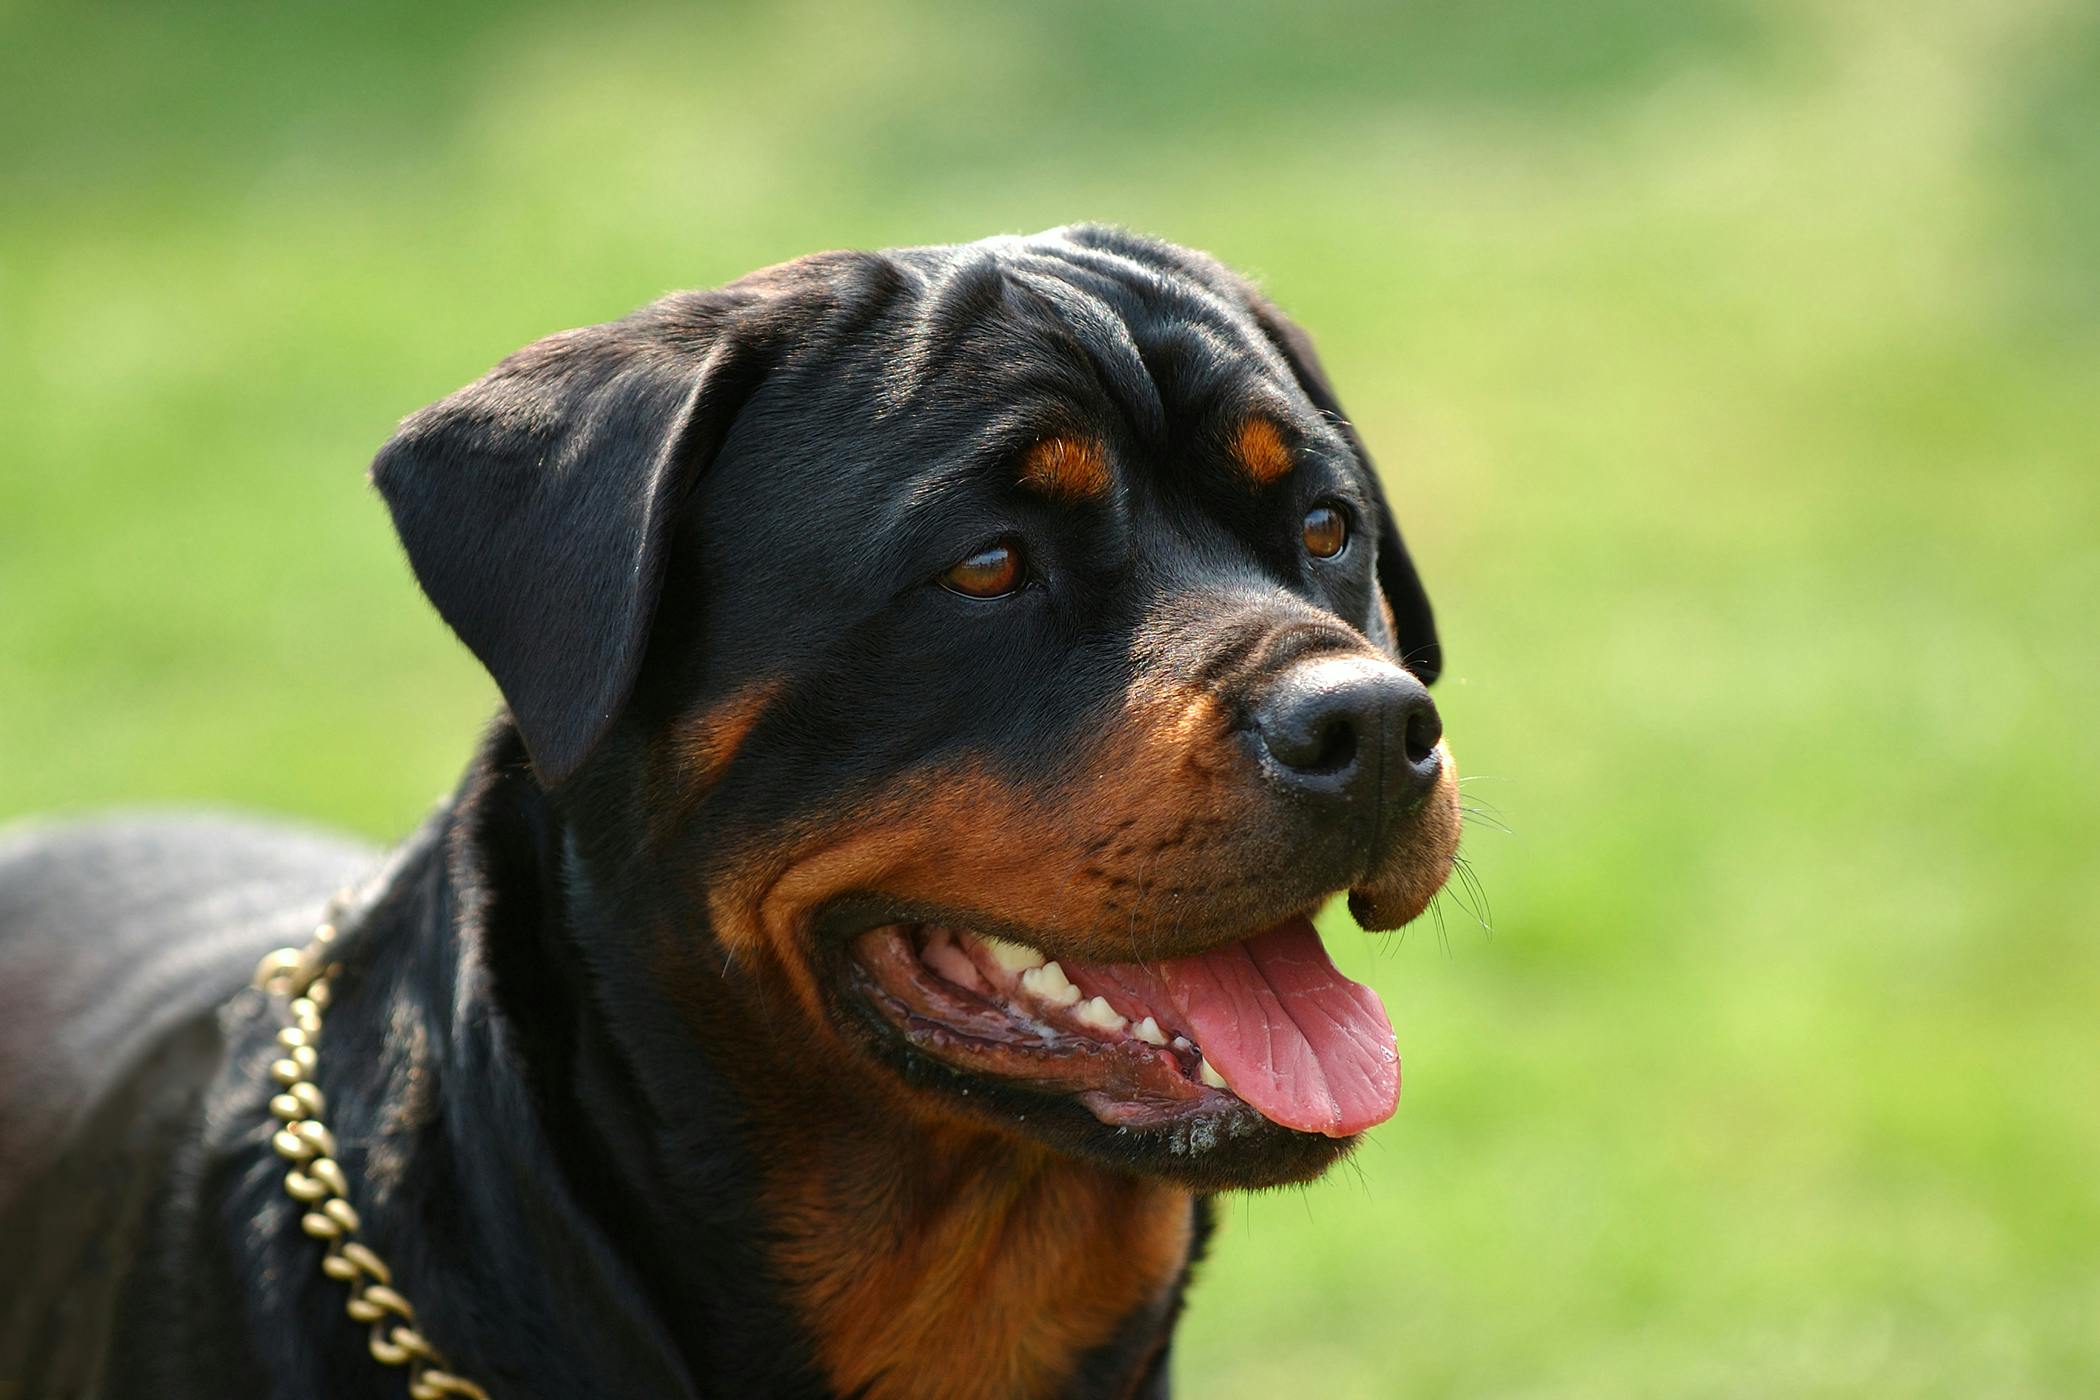 is cryptorchidism in dogs genetic